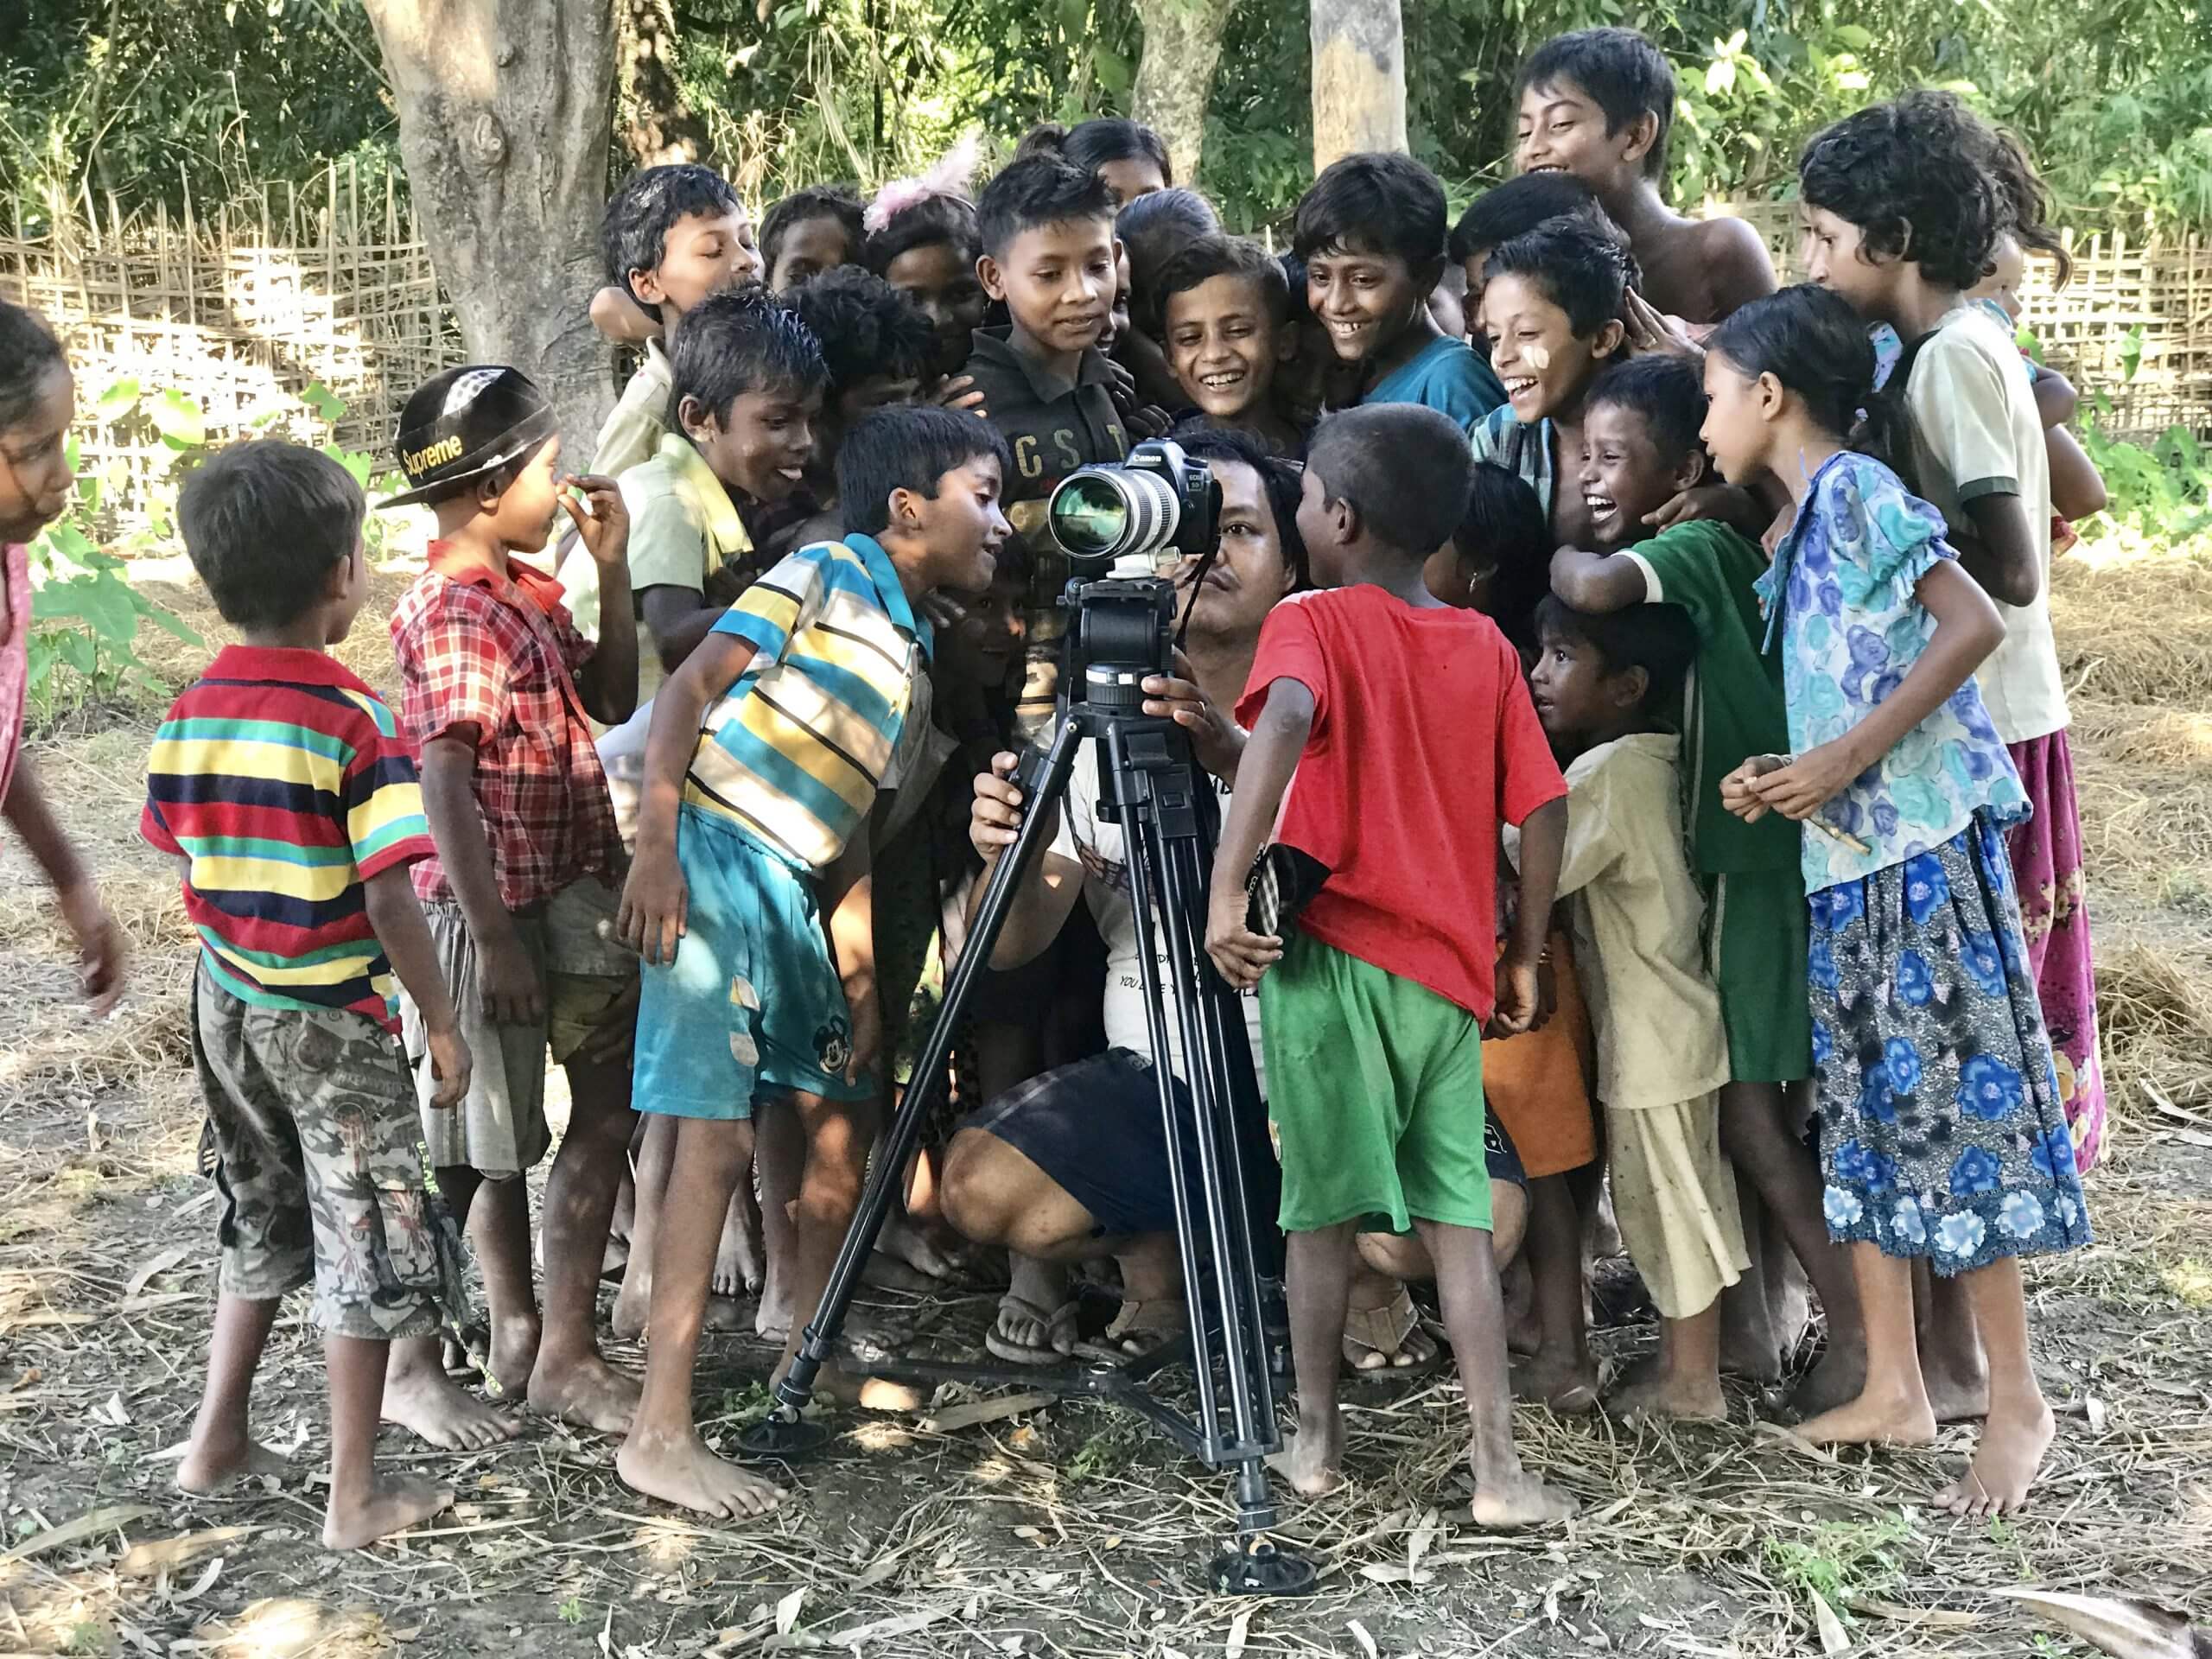 Production still from Midwives. Twenty kids are surrounding a camera man with a camera on a tripod, looking at the footage.